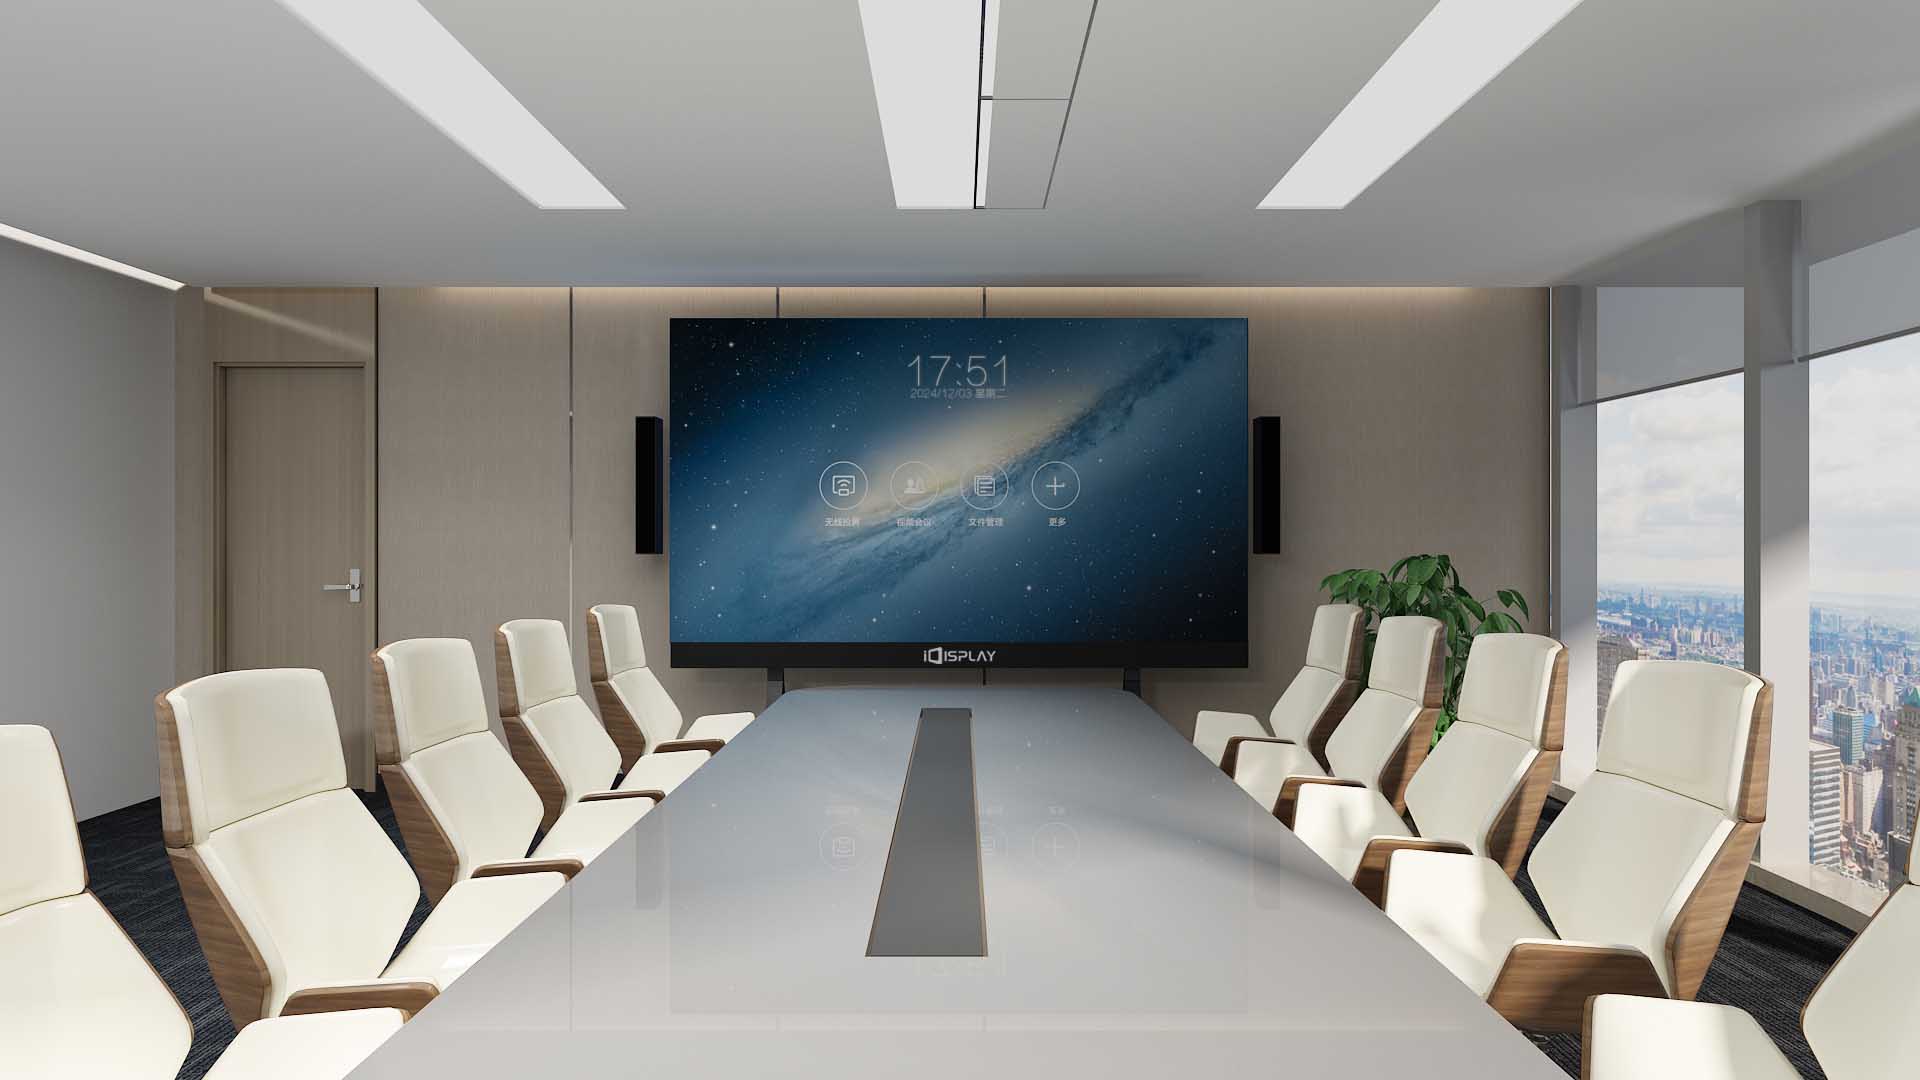 conference room display system